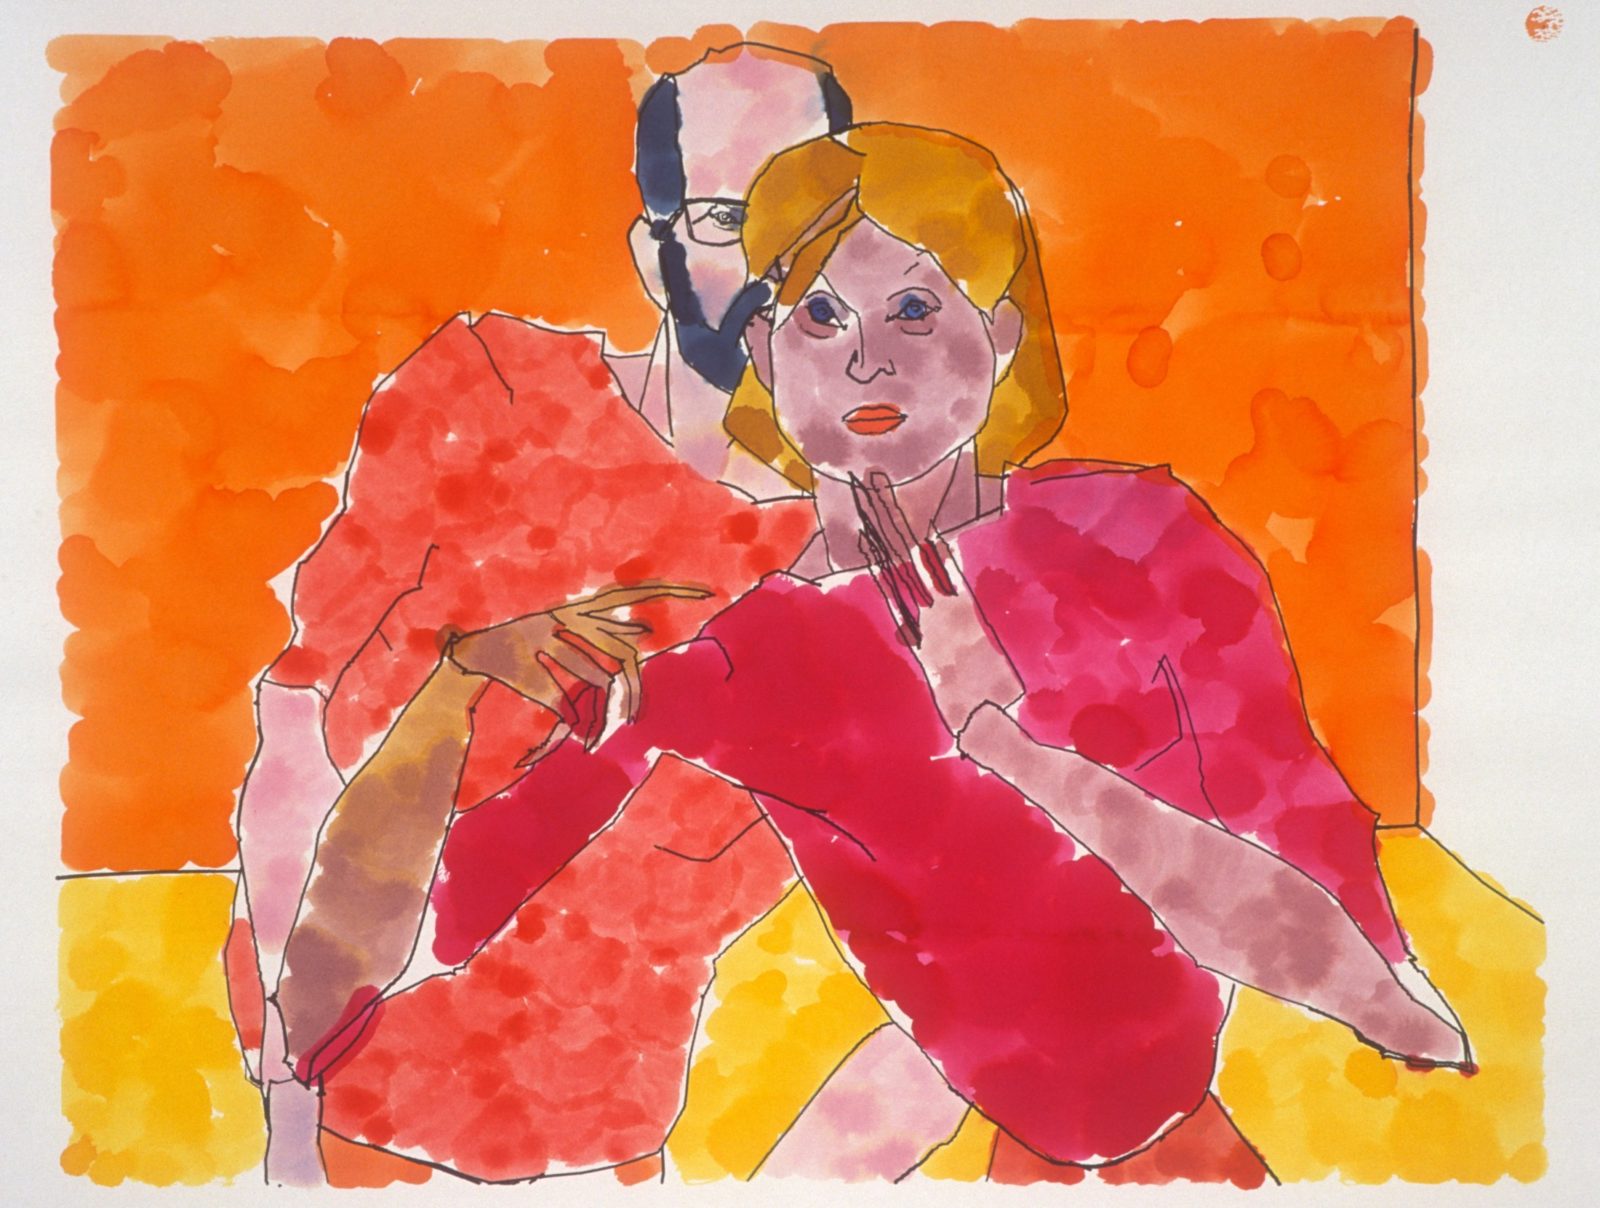 An expressionistic portrait of two humans painted by AARON, a computer learning system trained to paint.